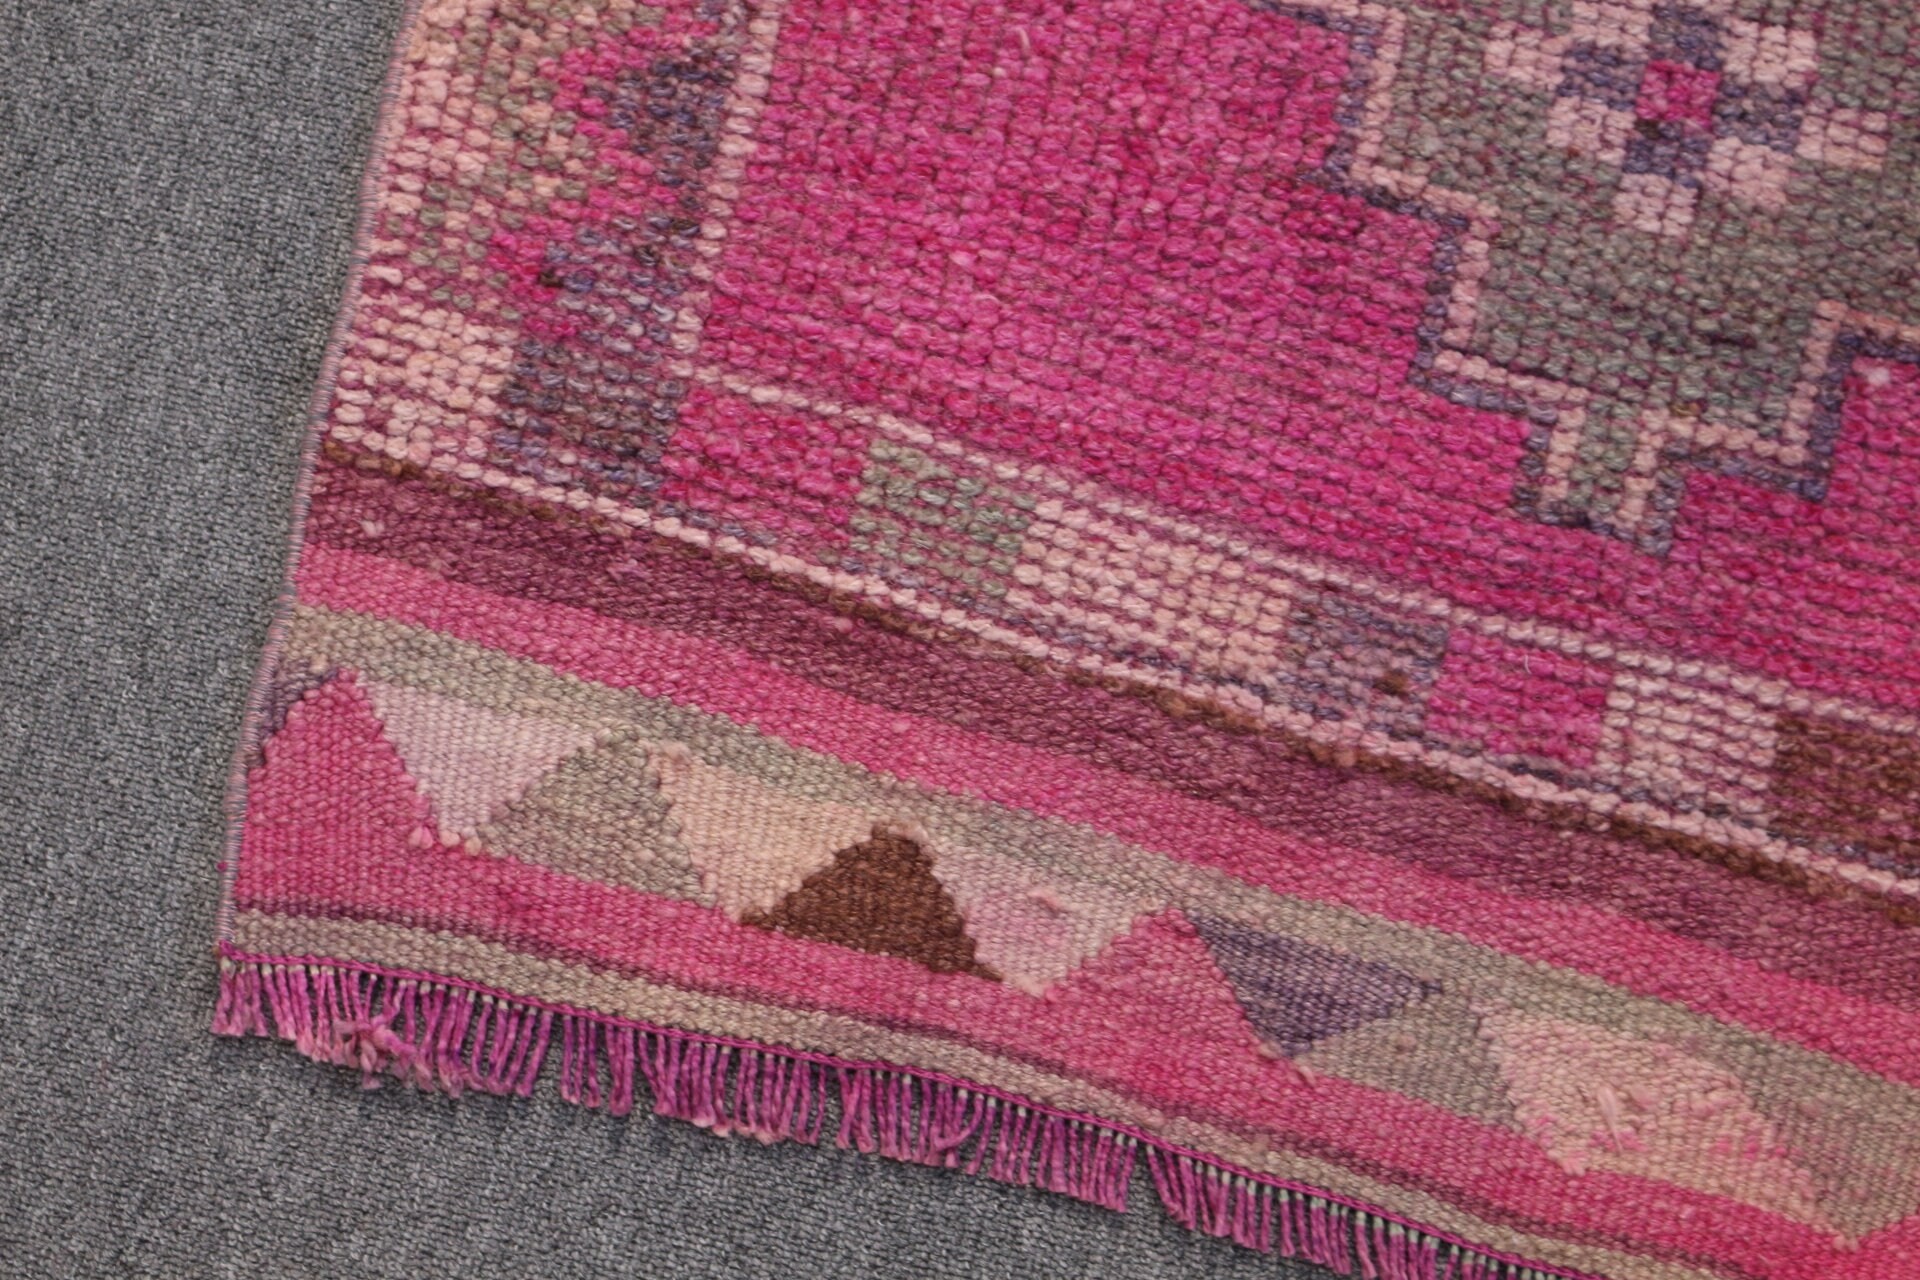 Vintage Rugs, 2.6x11.2 ft Runner Rug, Stair Rugs, Bedroom Rugs, Pink Kitchen Rug, Ethnic Rugs, Antique Rug, Rugs for Kitchen, Turkish Rugs